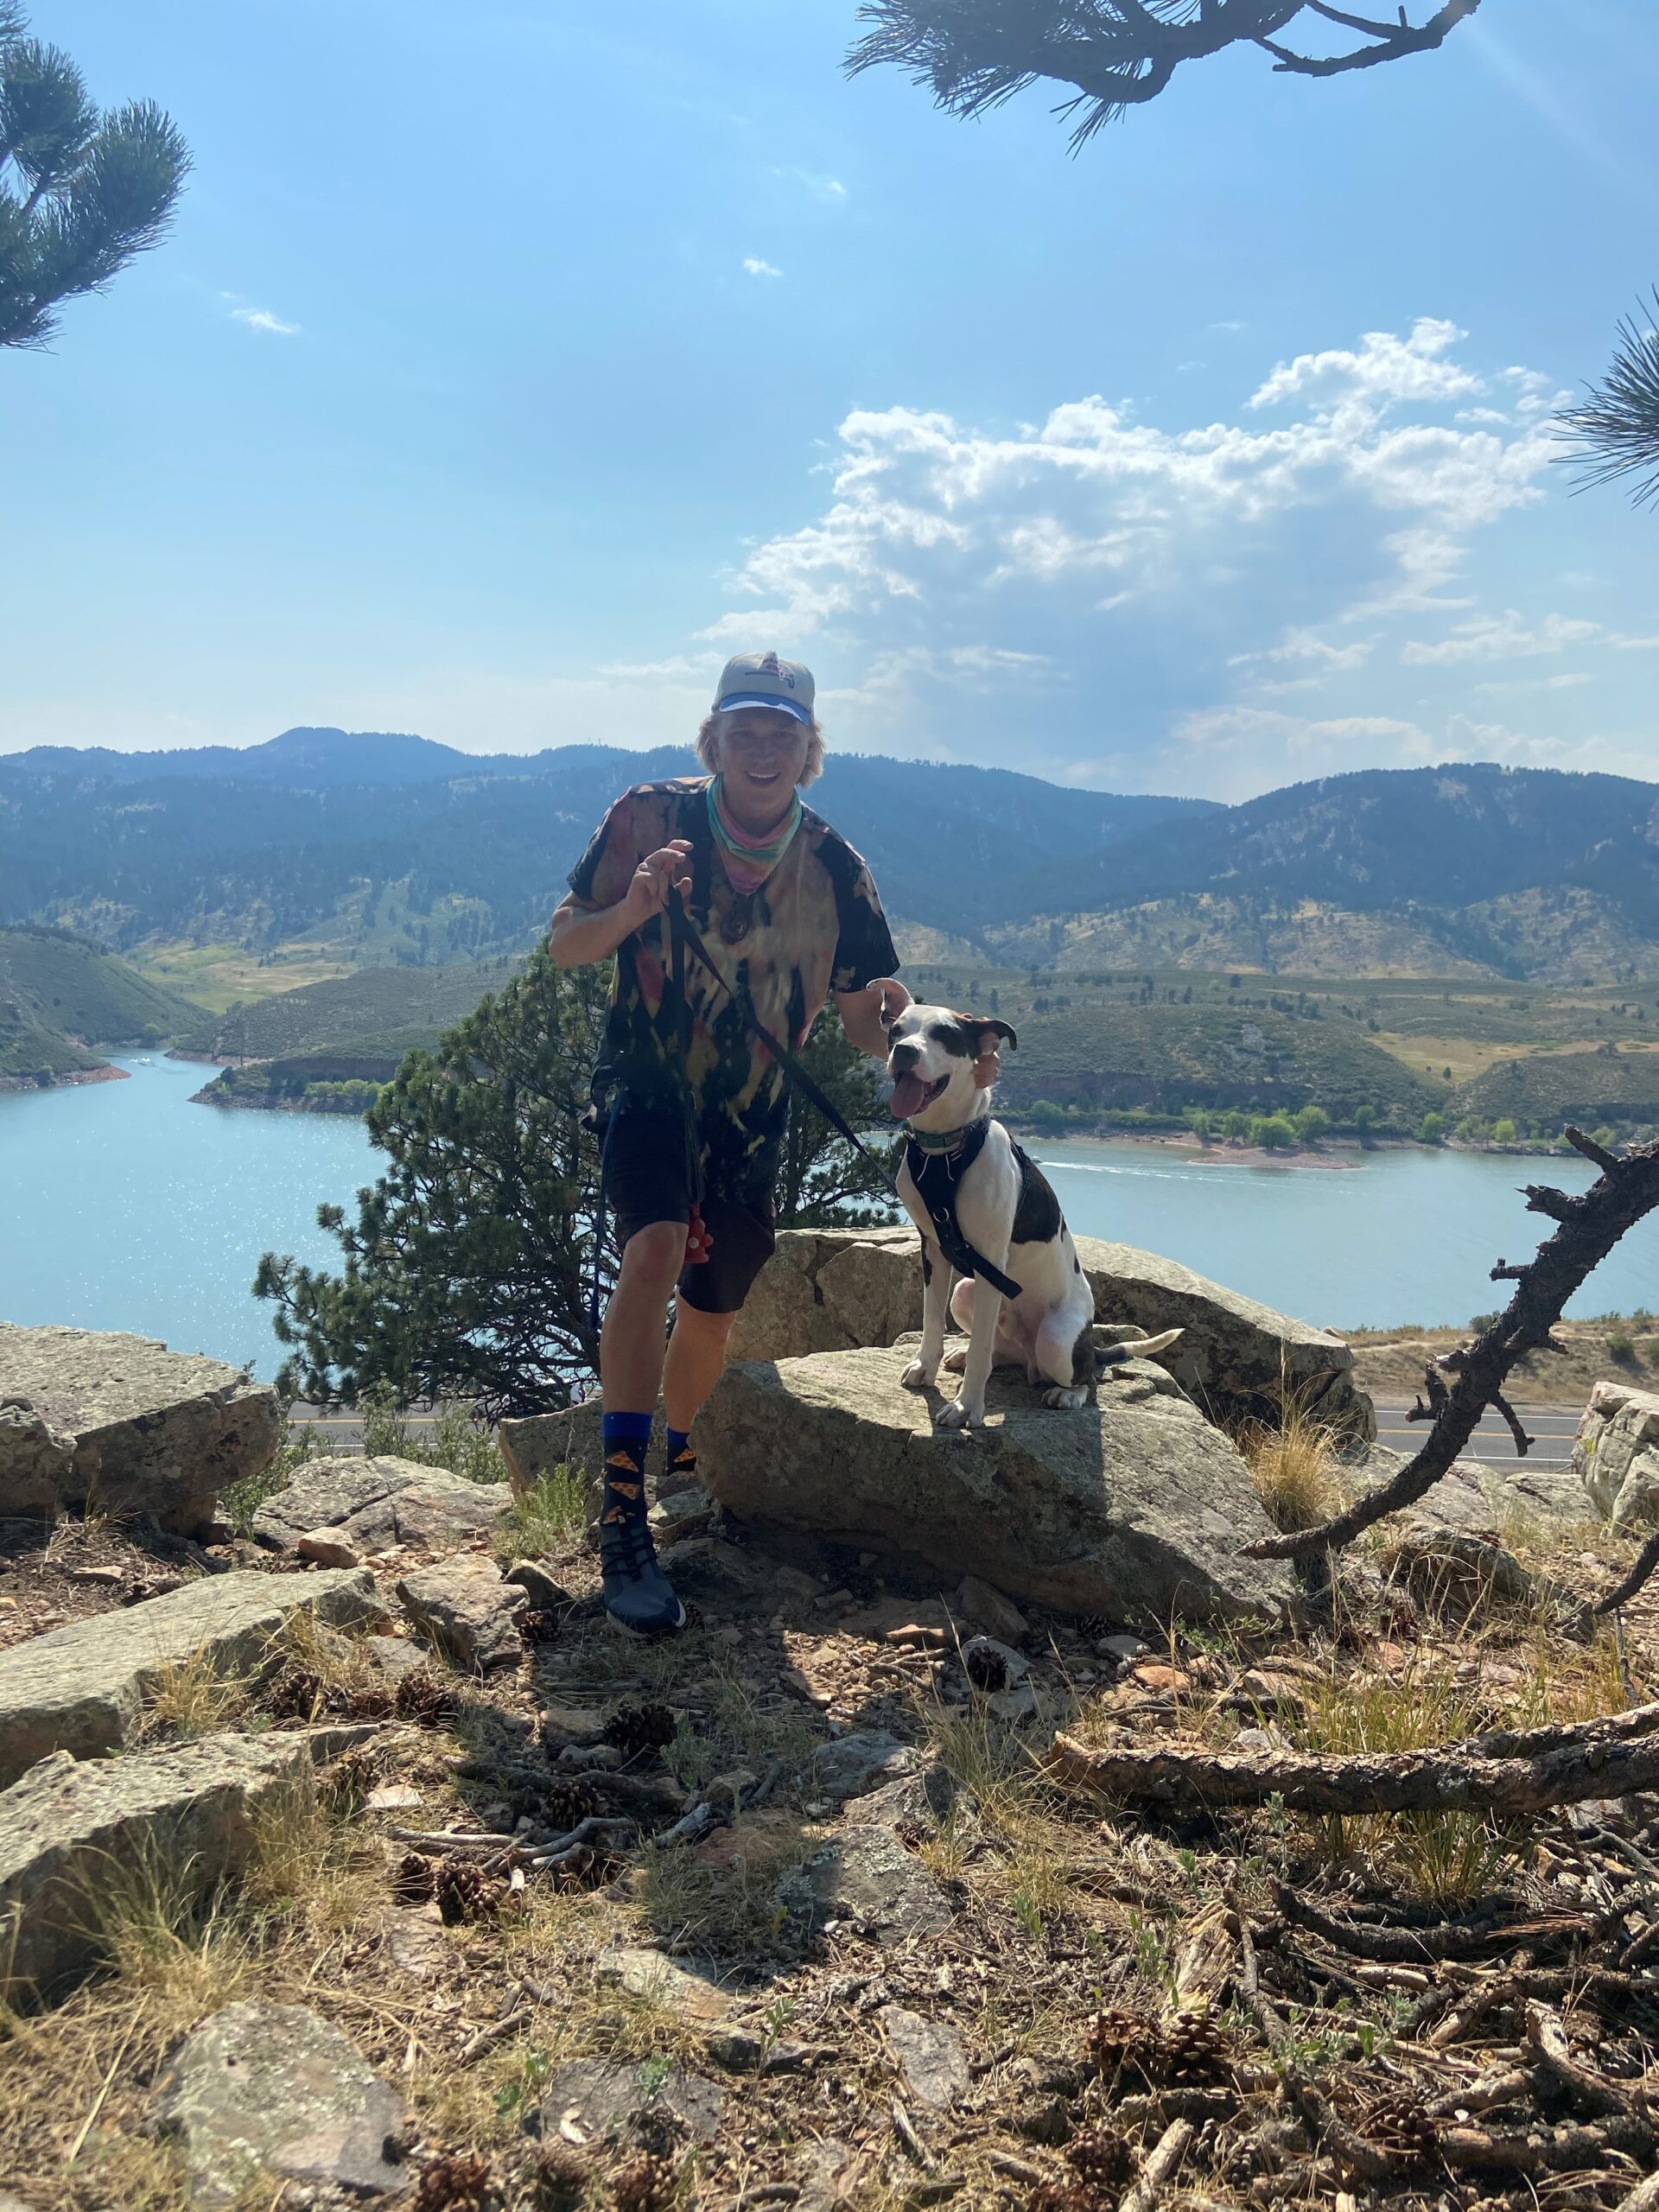 Andy and his dog, Wesley, on one of their summer camping expeditions